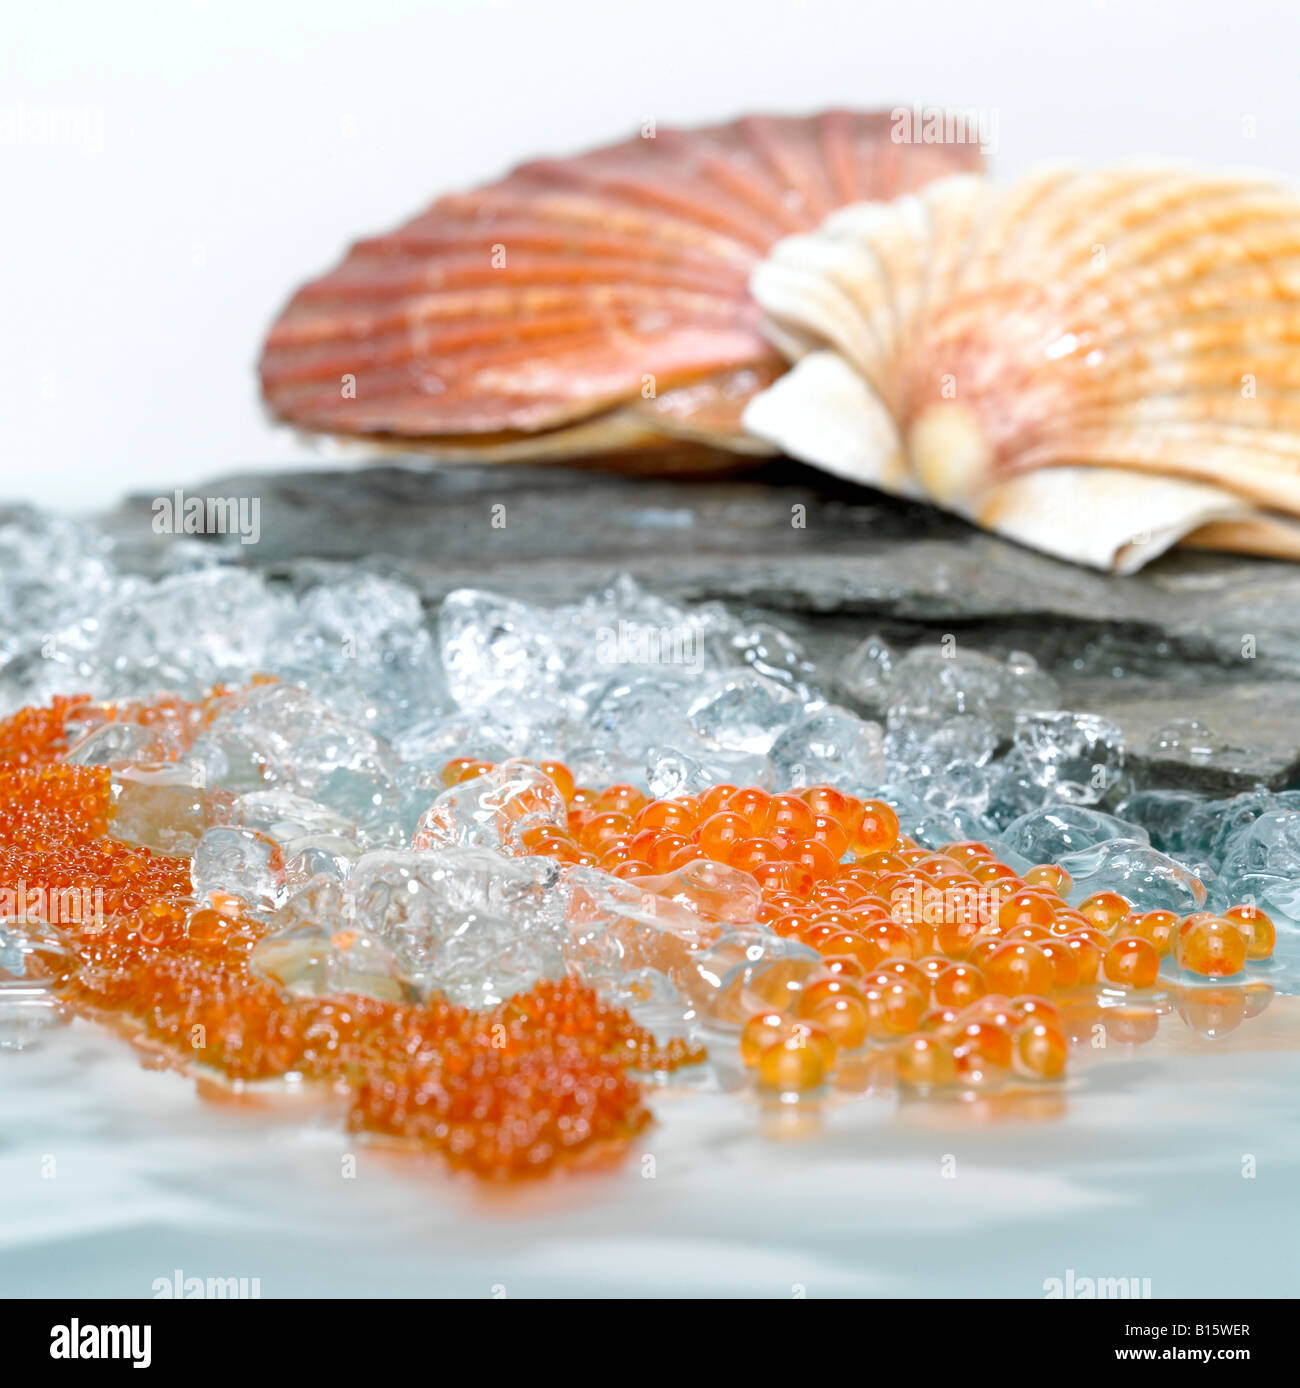 Trout Caviar on crushed ice, in background scallop shells Stock Photo